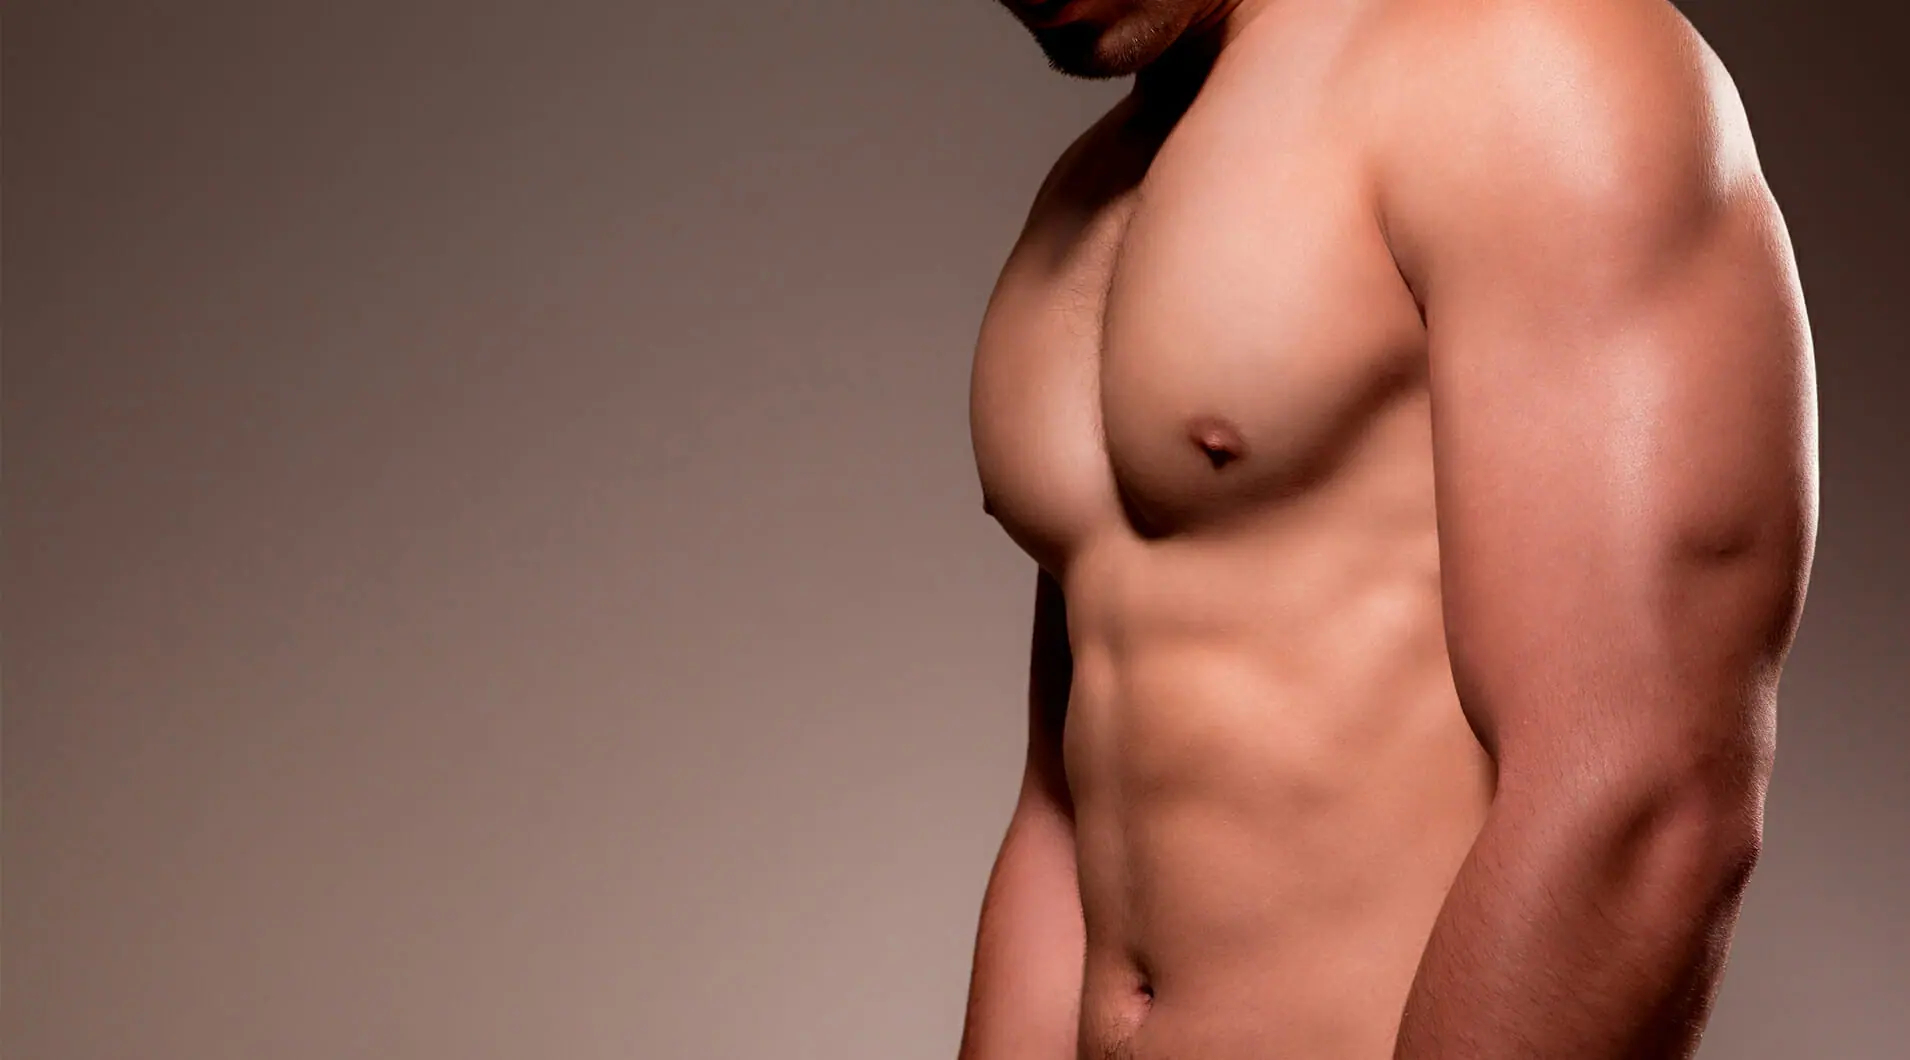 a shirtless man 's chest and arm are shown